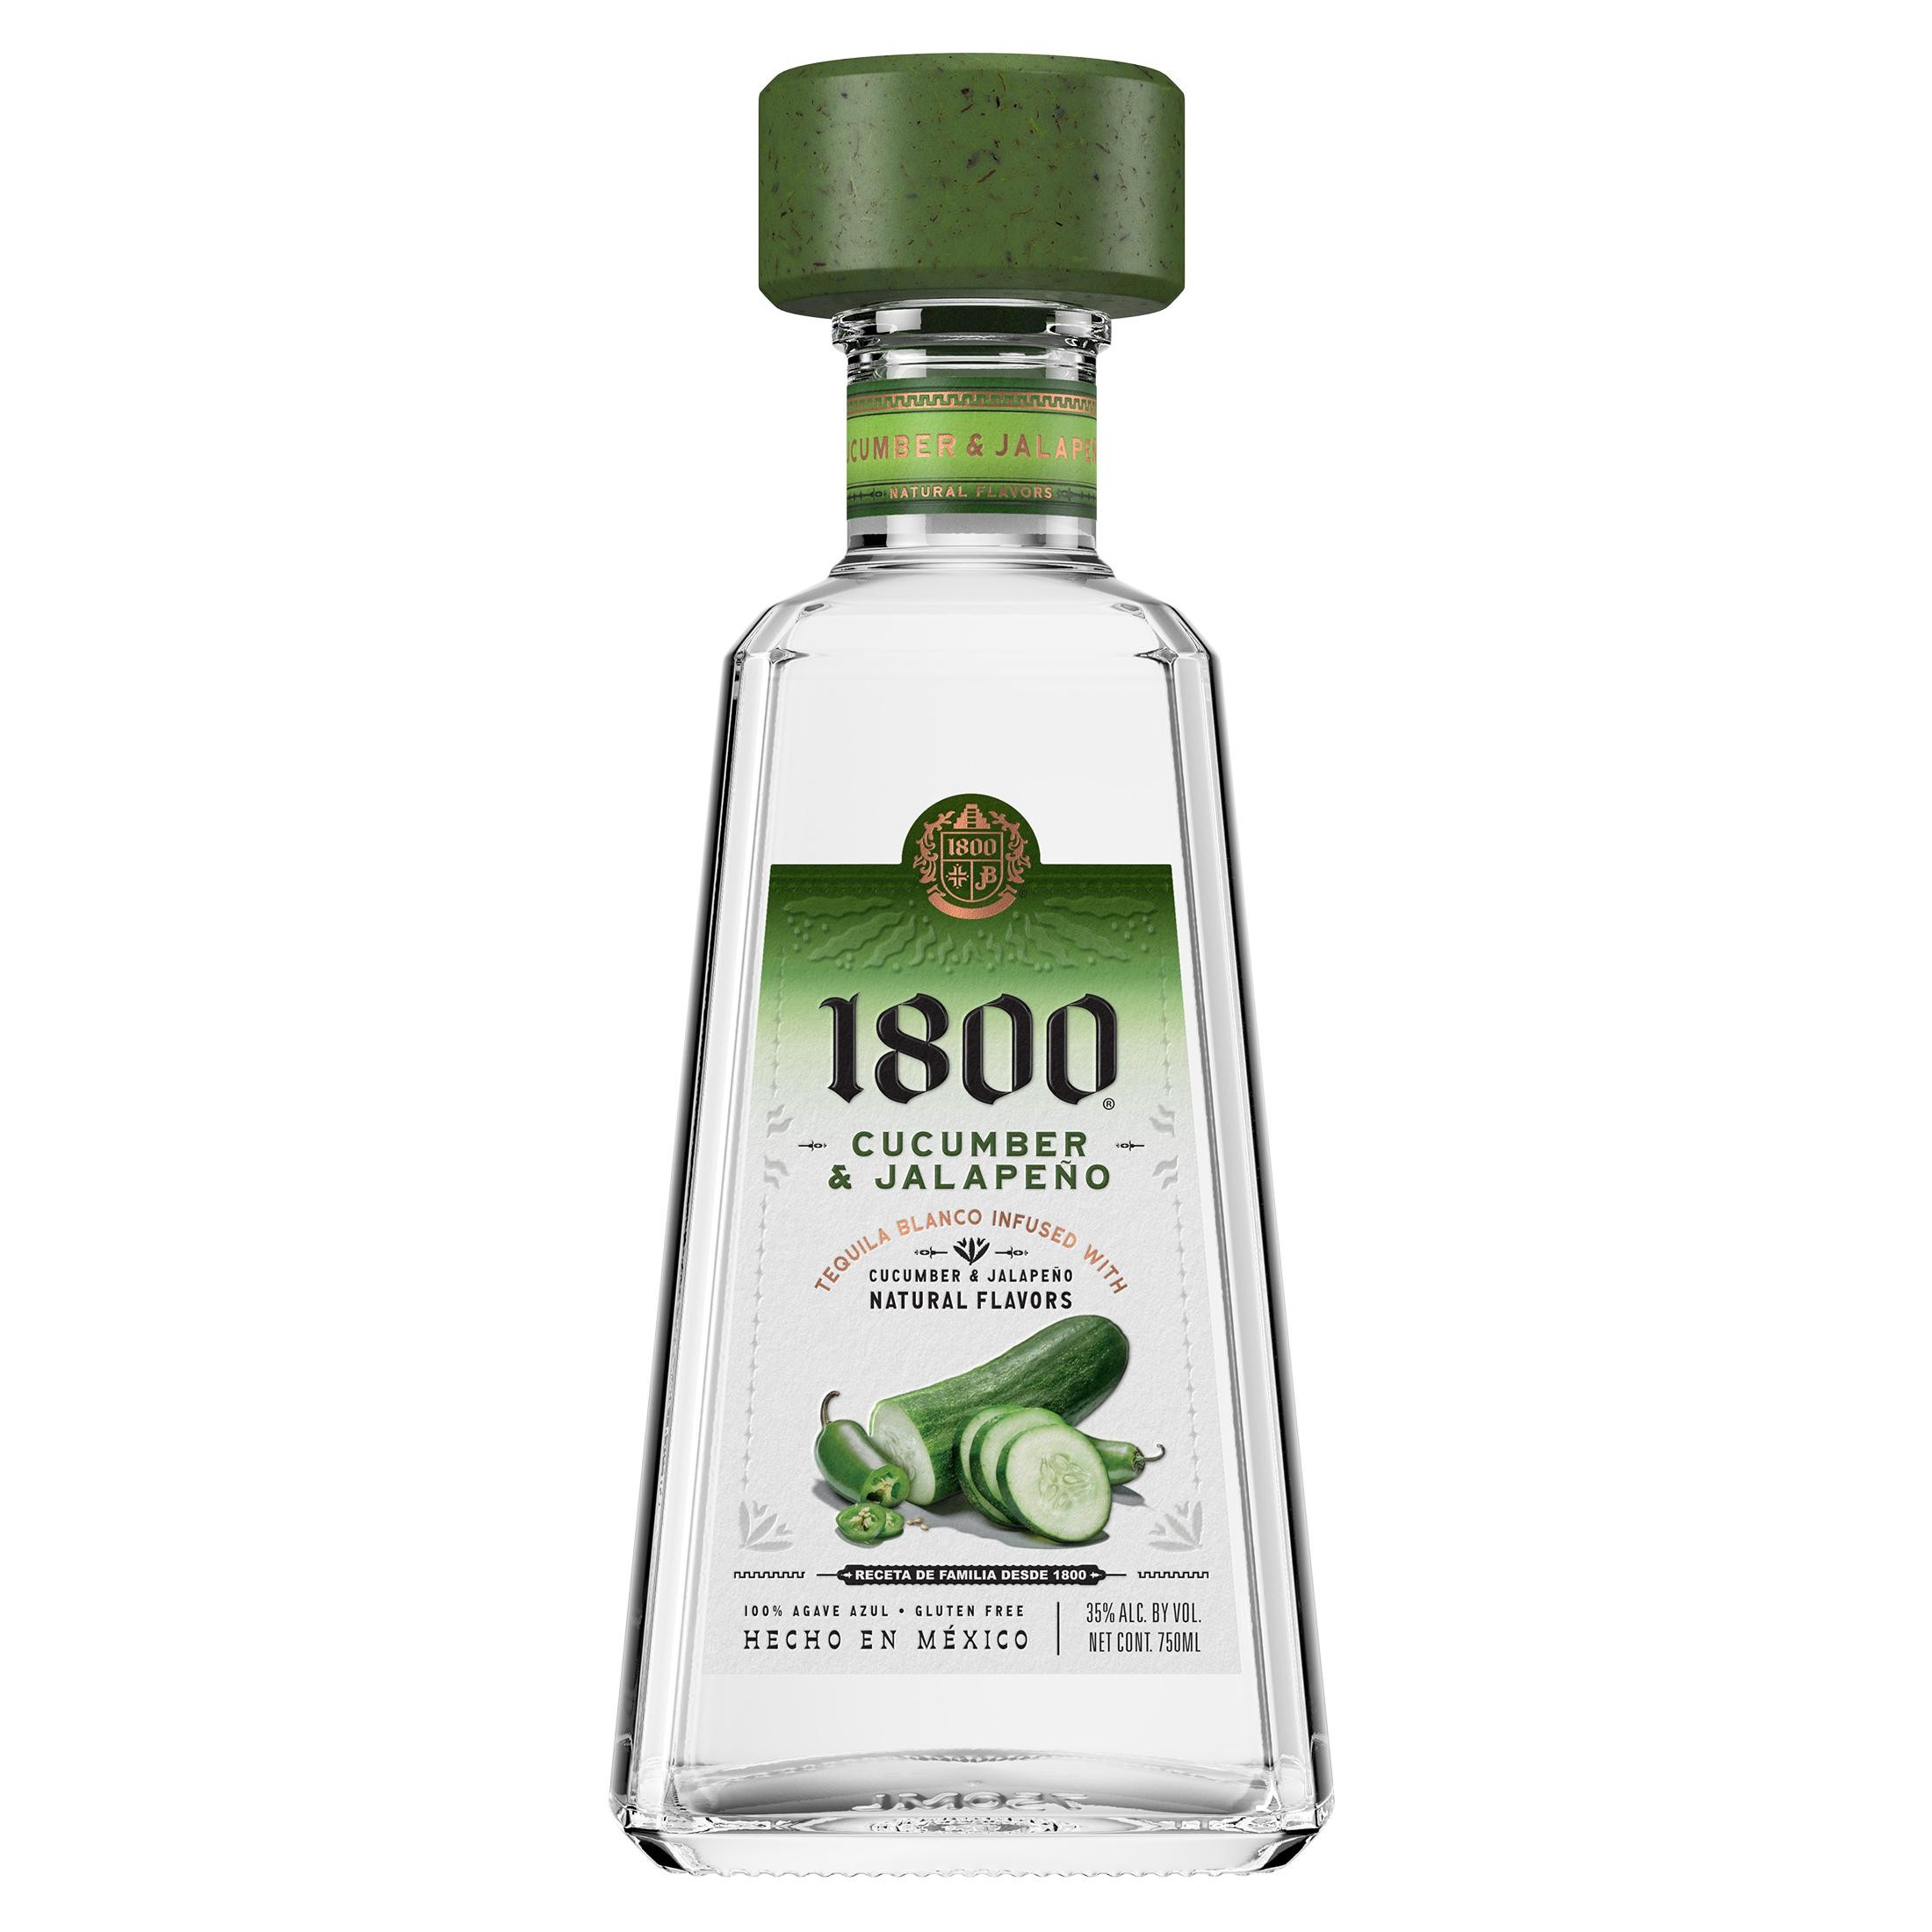 1800 Tequila Cucumber & Jalapeo Tequila Flavored - 750ml Bottle